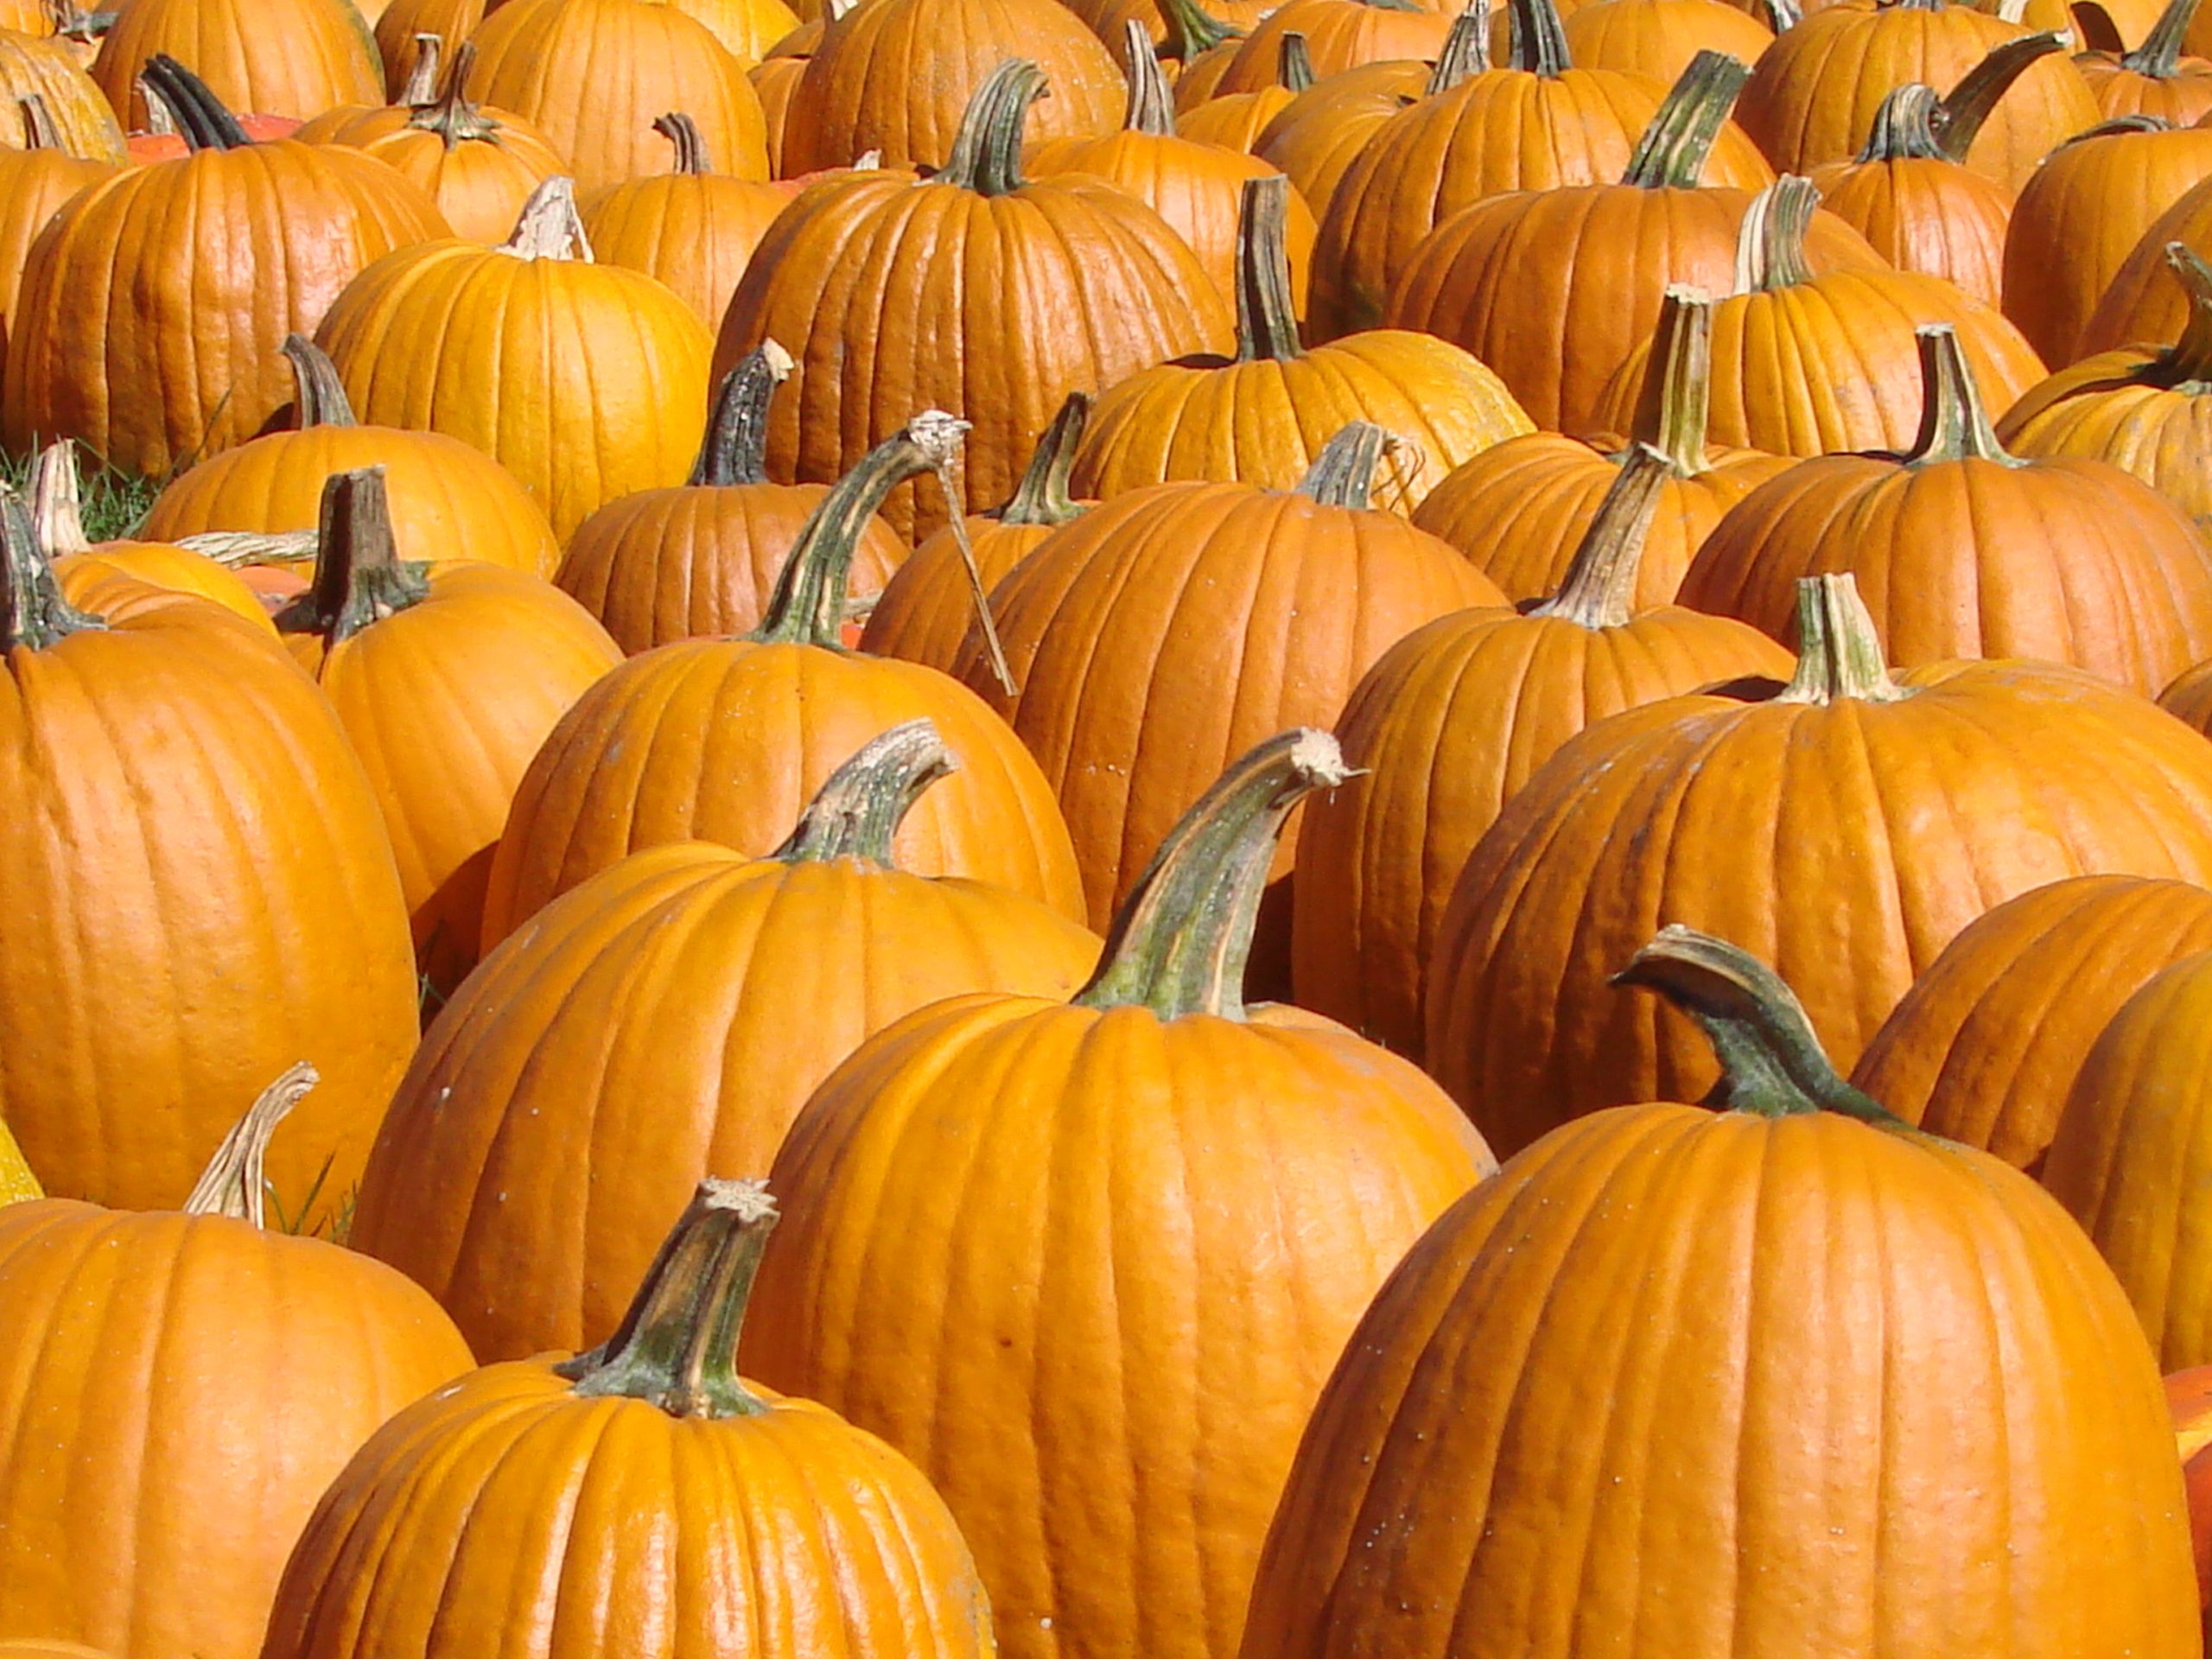 Pumpkins For Sale! (user submitted)